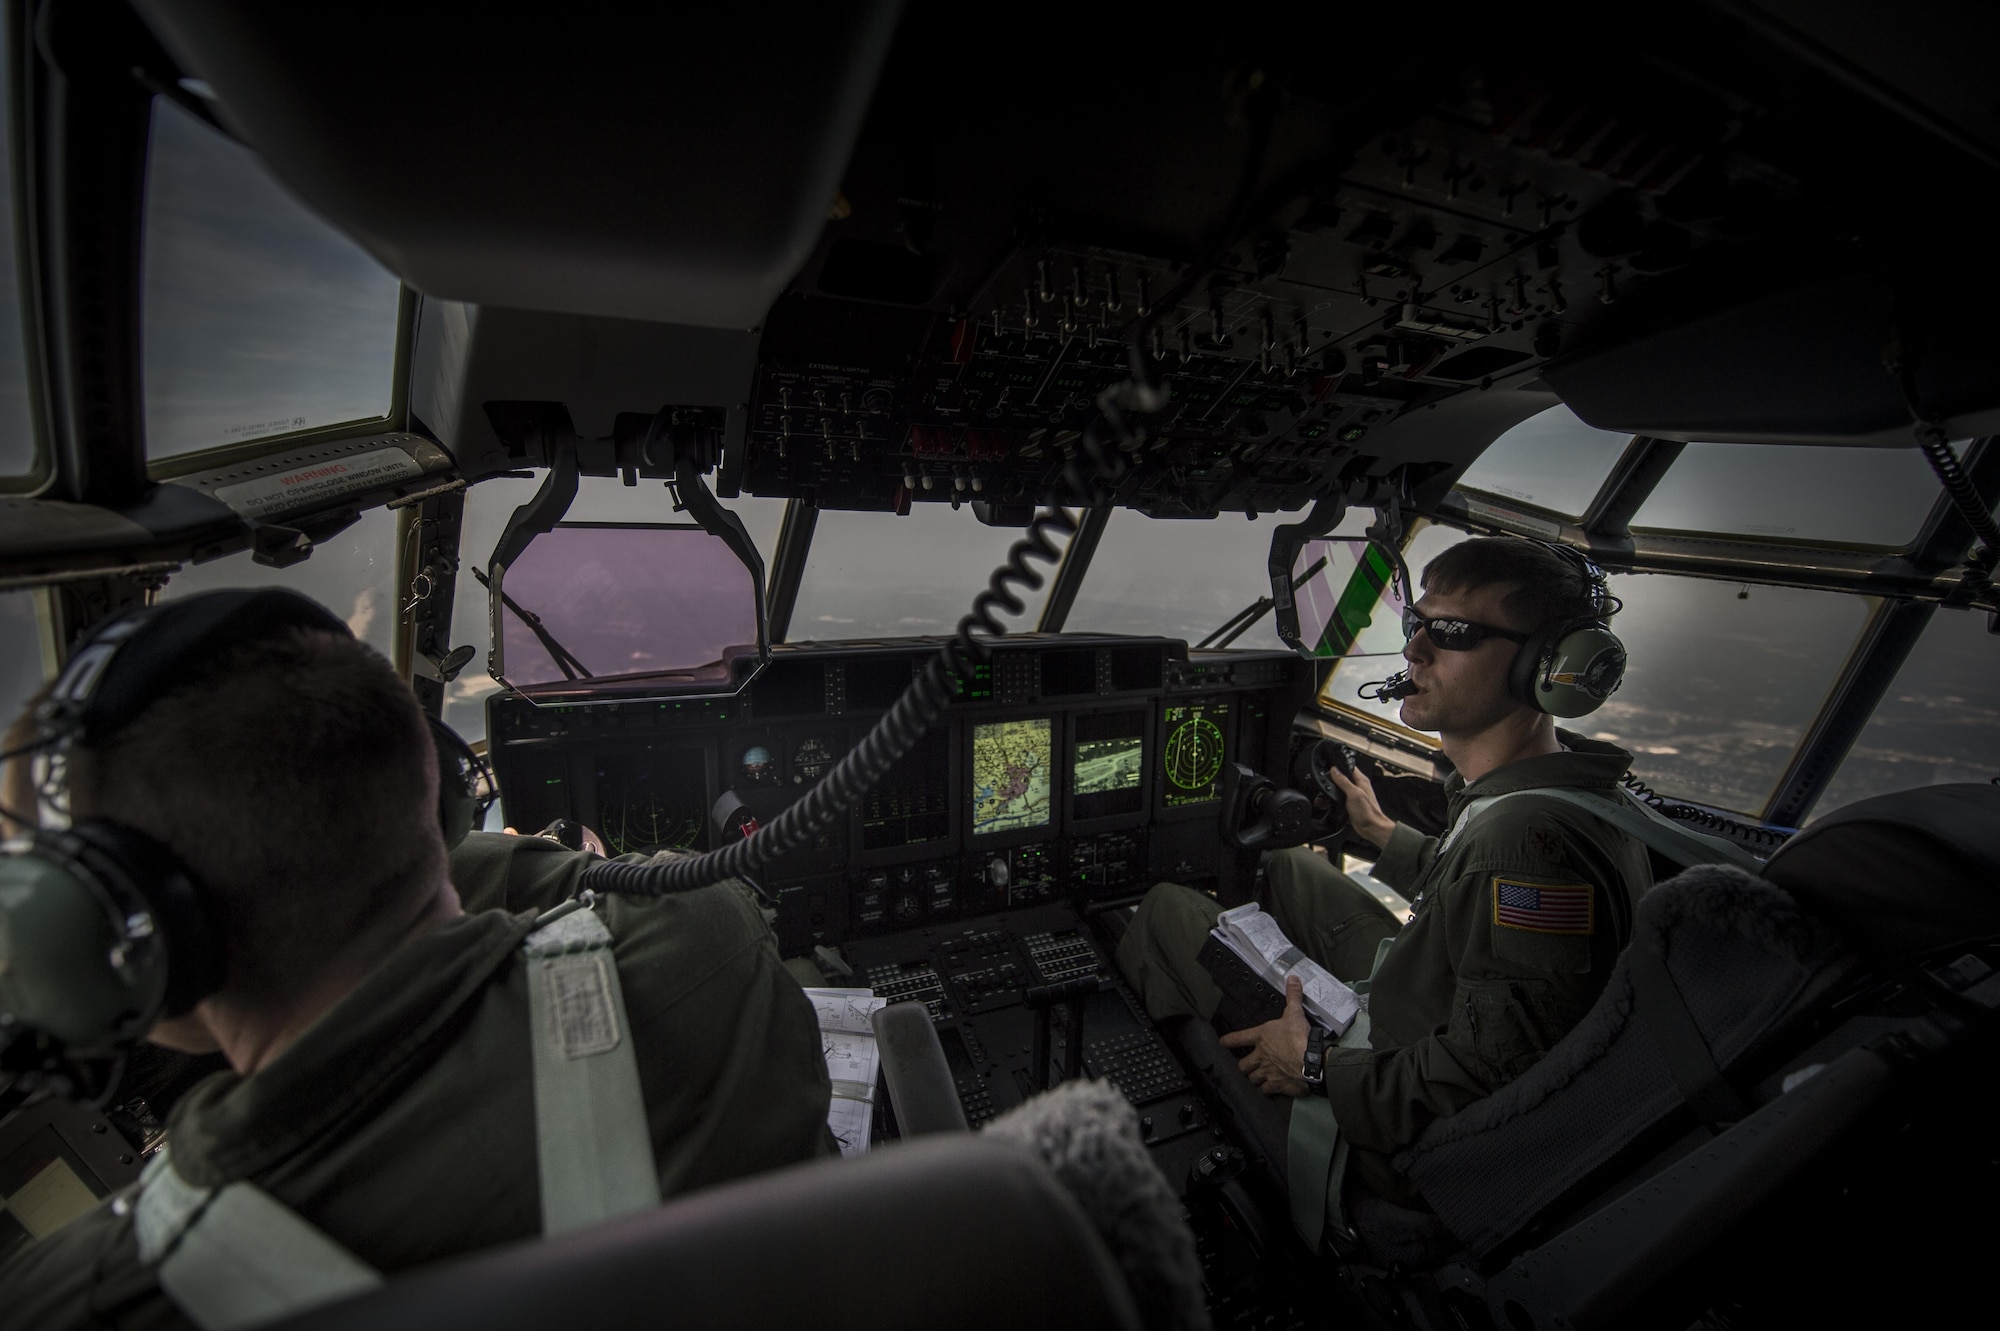 Maj. Brian Pesta right, 1st Special Operations Group Detachment 2 pilot (right) and Maj. Jason Fox left, 18th Flight Test Squadron pilot, look out the left window during the delivery flight of Air Force Special Operations Command’s first AC-130J Ghostrider to the 1st Special Operations Wing on Hurlburt Field, Fla., July 29, 2015. The AC-130J recently completed its initial developmental test and evaluation at Eglin Air Force Base, Fla., and will begin initial operational test and evaluation under aircrews of the 1st SOG Det. 2 and 1st Special Operations Aircraft Maintenance Squadron later this year. (U.S. Air Force photo/Senior Airman Christopher Callaway)